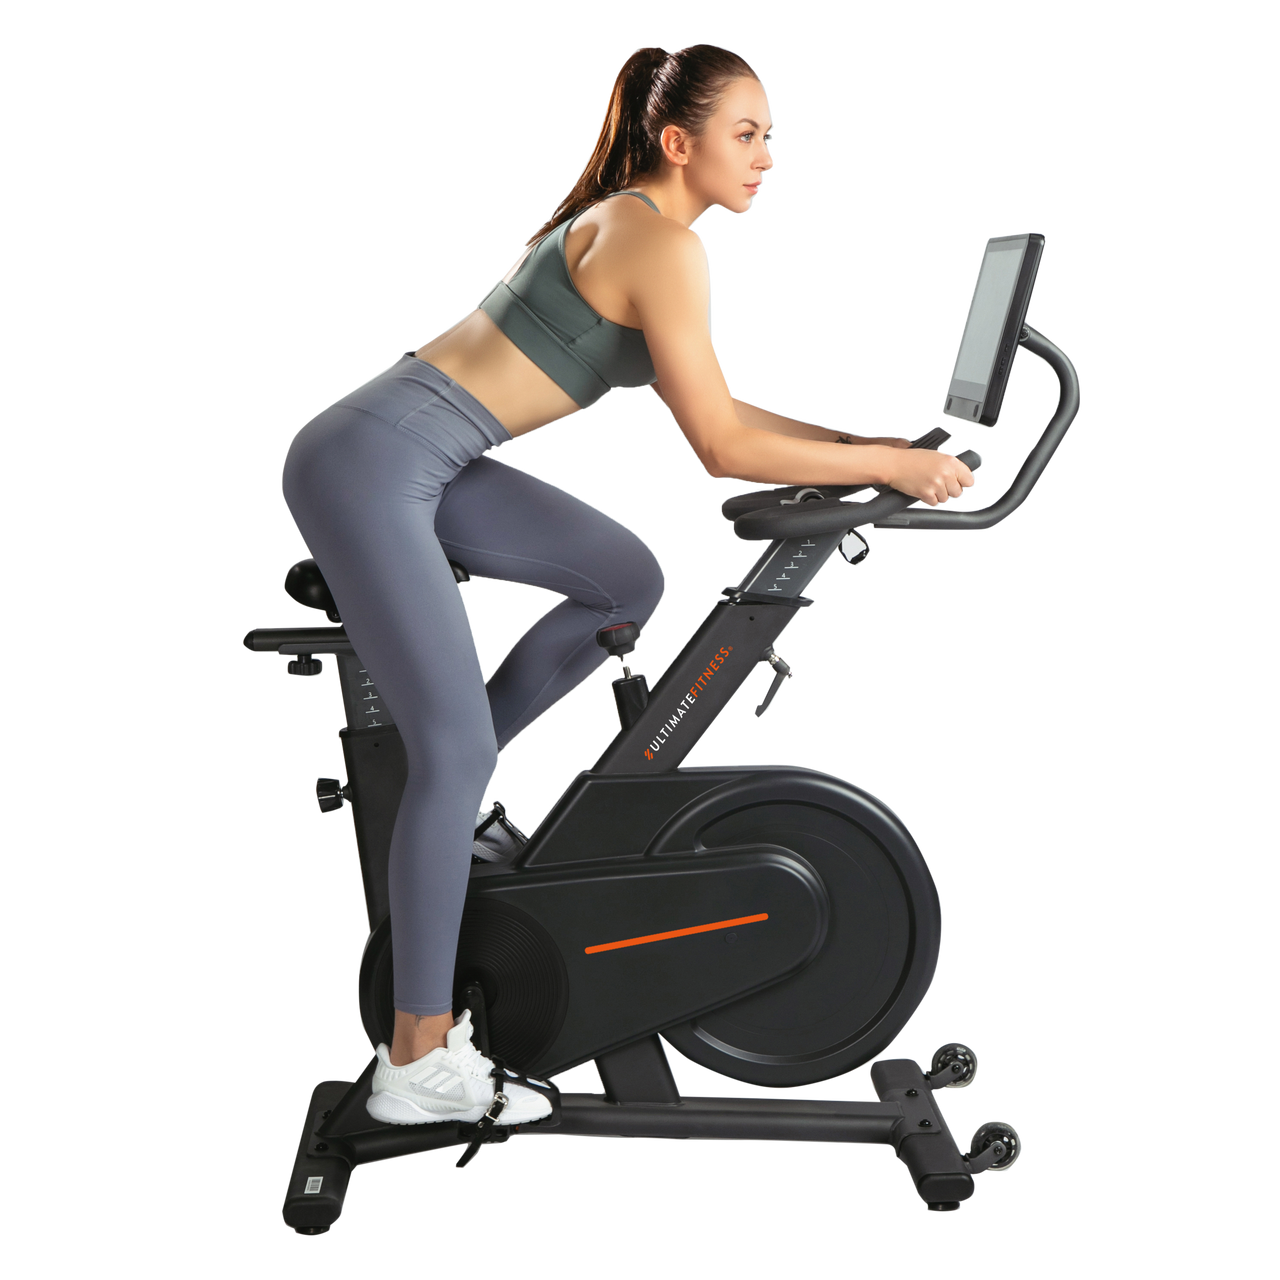 Bicicleta Spinning Magnetica Ultimate Fitness Z700x Elite Touch [Openbox]